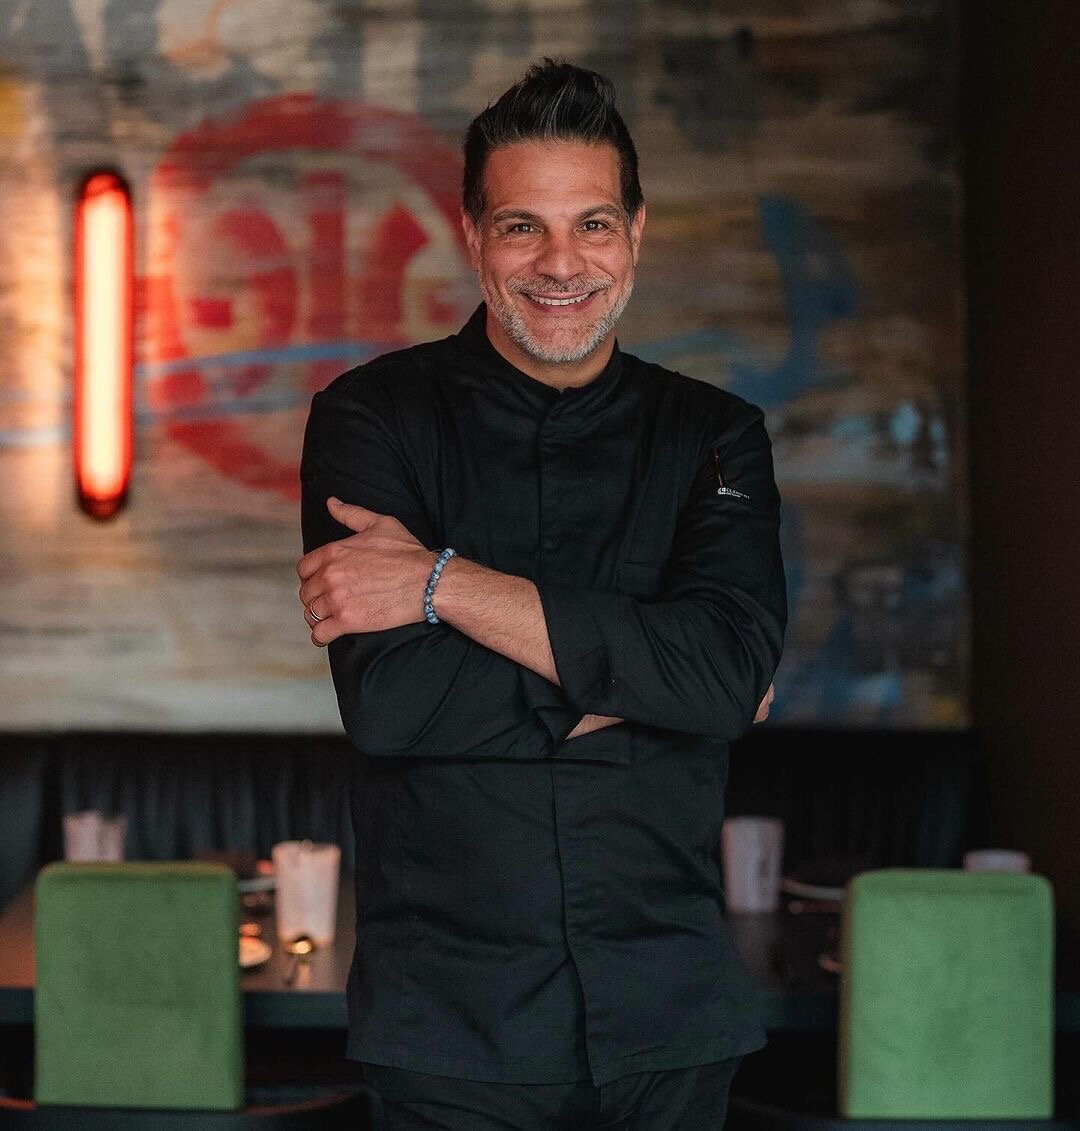 Taste of Tennis is back and we are thrilled to be working with AYS once again! The headliner this year is celebrity Chef Angelo Sosa along with a stacked lineup of Greater Palm Springs top culinary talent! Click the link in the bio for more informati